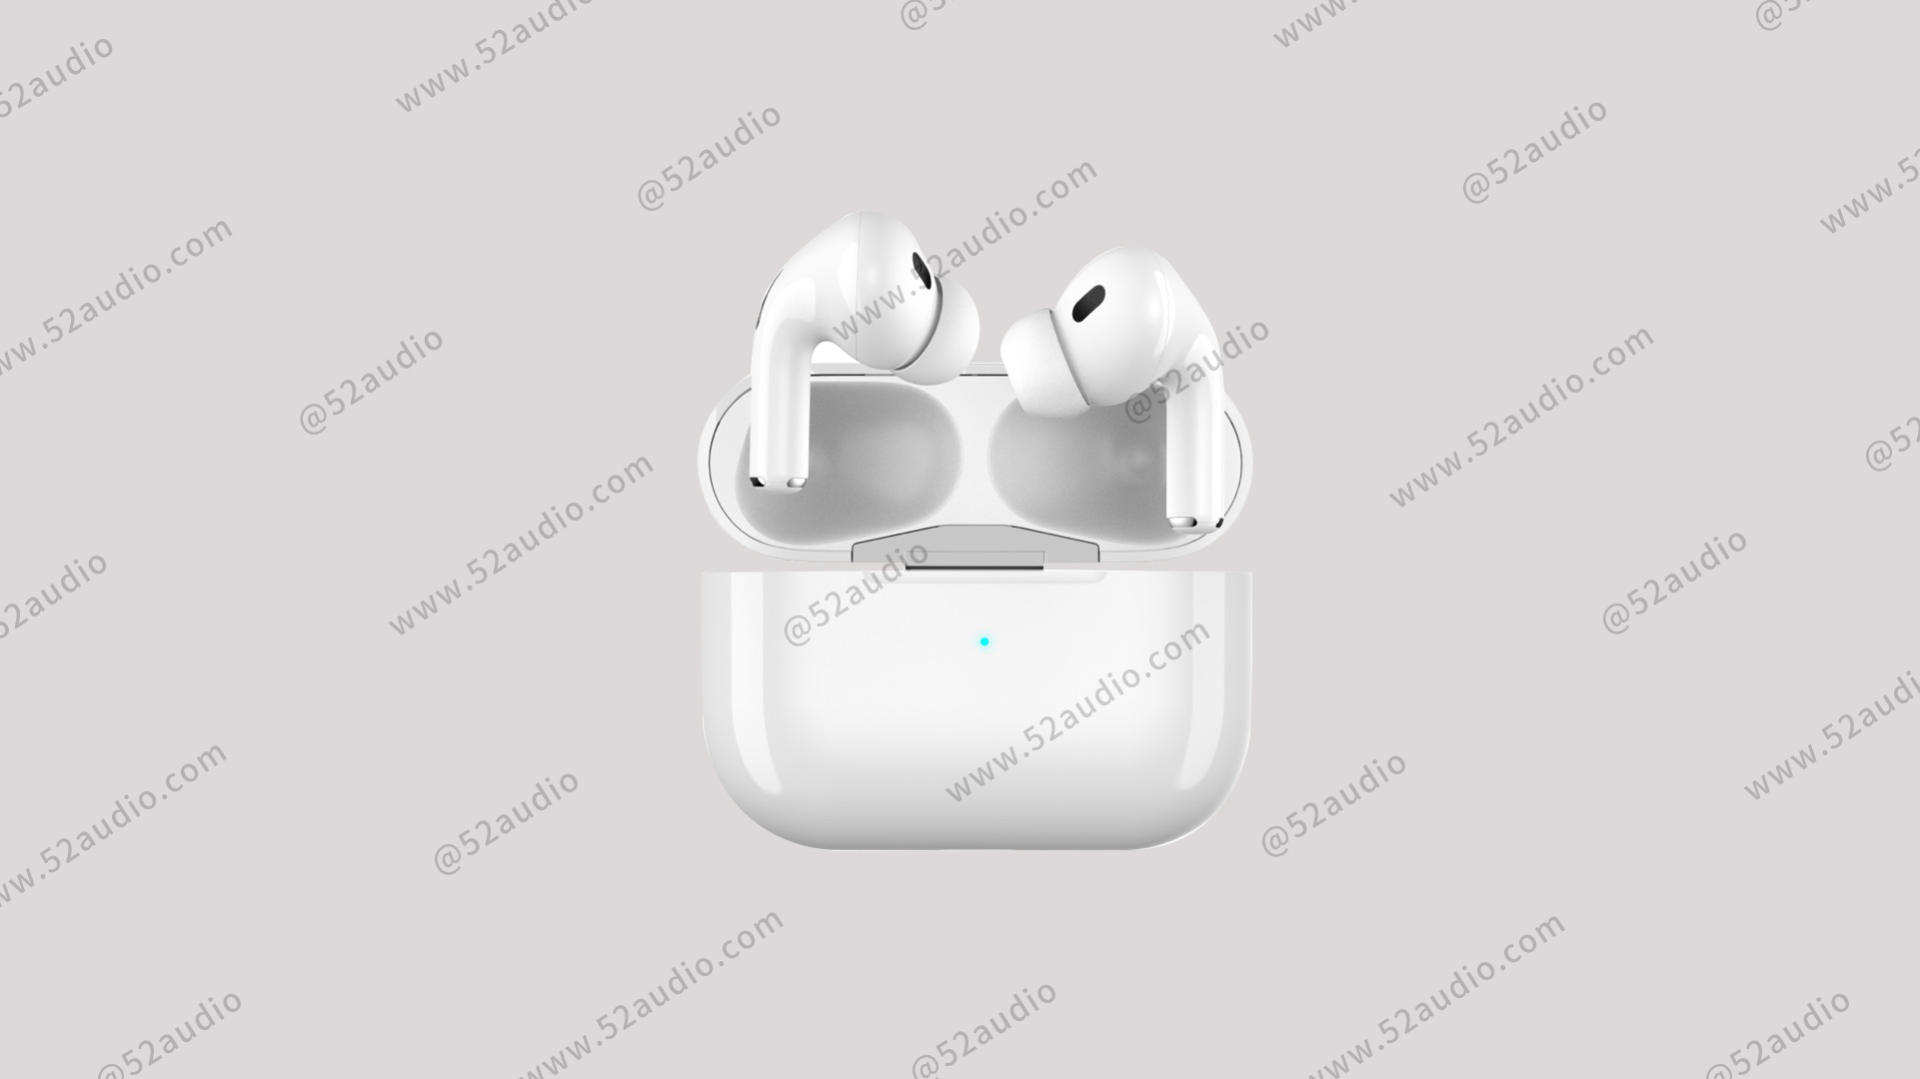 AirPods Pro 2 Said to Feature Upgraded H1 Chip, Find My, Heart Rate Detection, USB-C and More